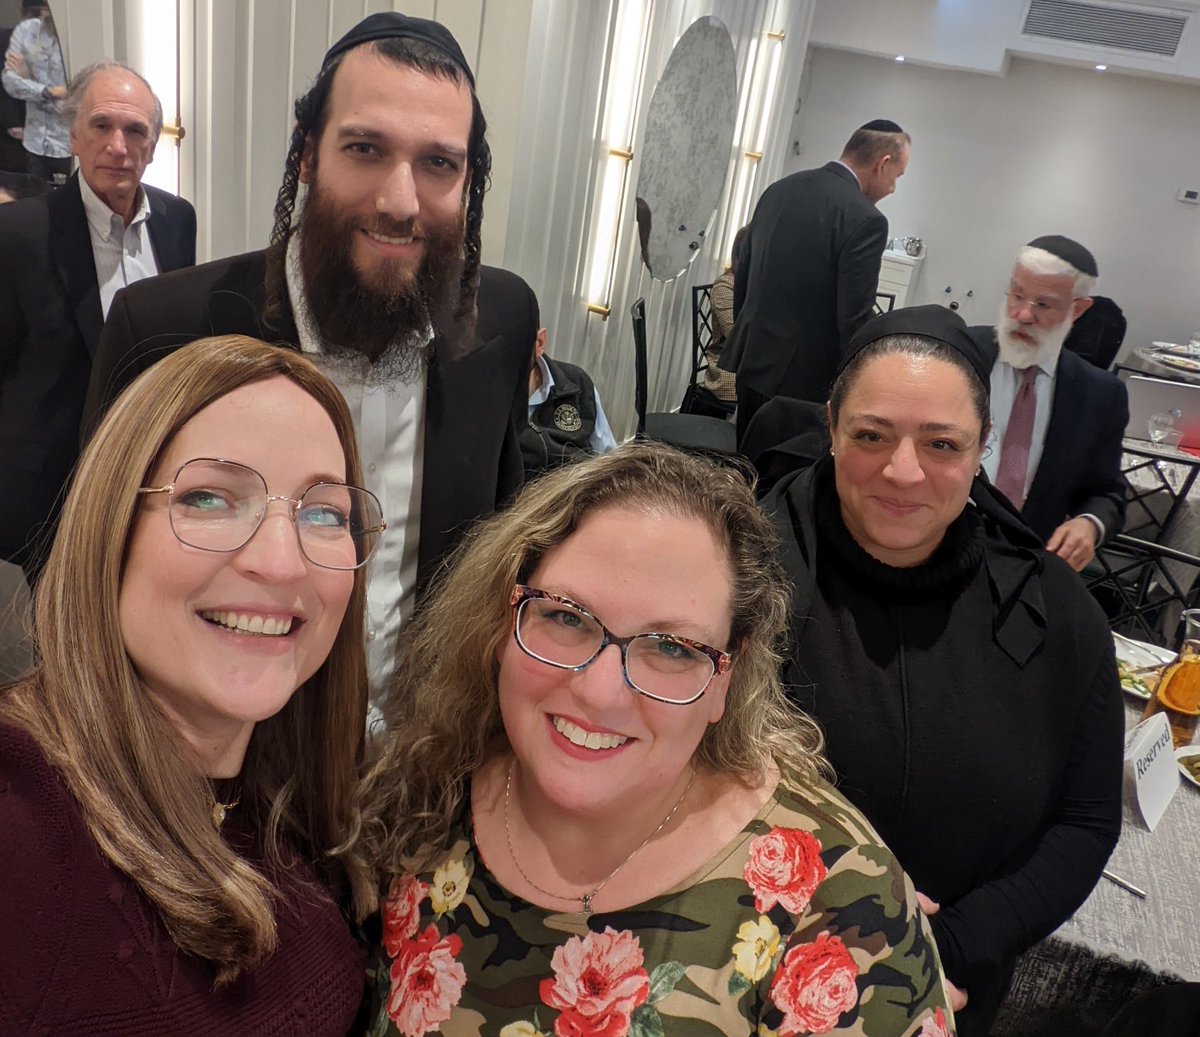 JCCGCI was proud to co-sponsor Nachas Health’s annual Chanukah concert for Holocaust Survivors.

The inspirational music of @BeriWeber ignited joy and hope in the souls of everyone who attended. 🔥

Thank you to Rizy Horowitz and everyone who made this beautiful event possible!